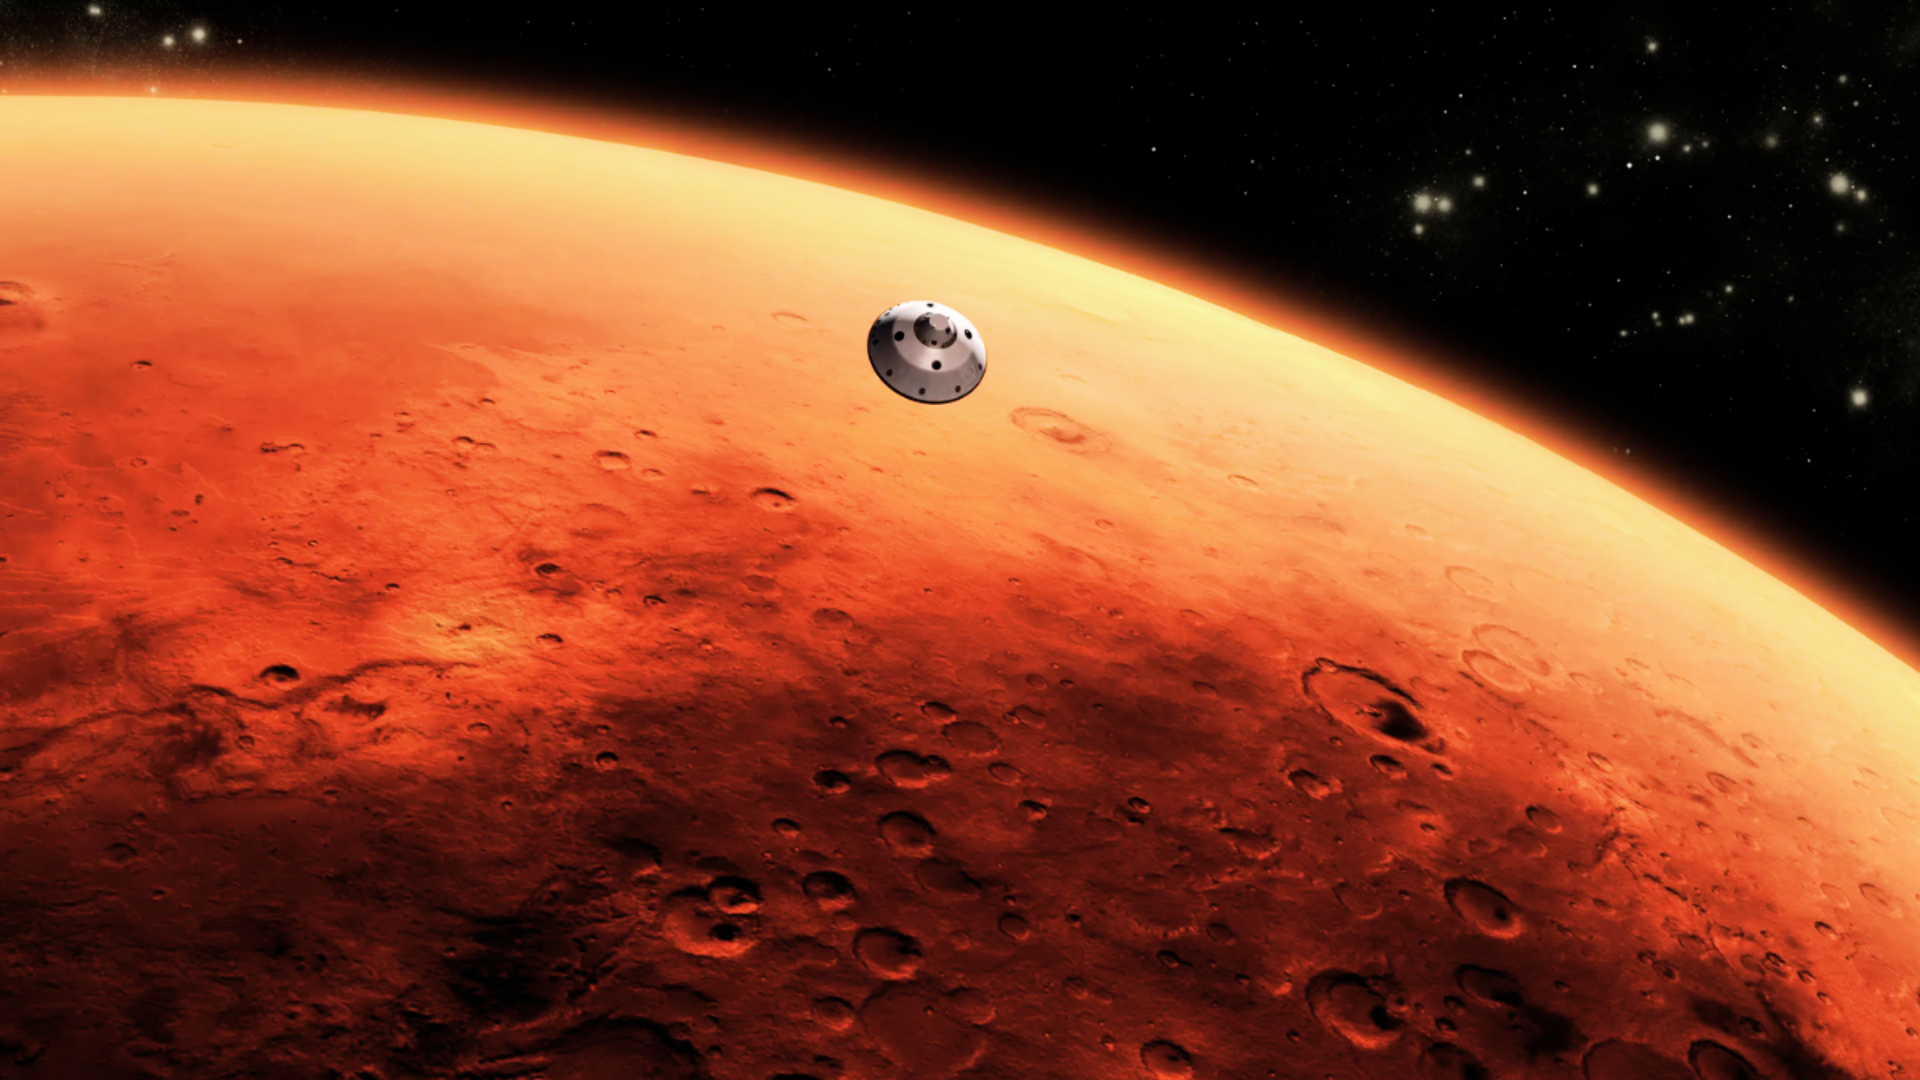 ISRO Reveals Mars Mission Strategy: Helicopter, Rover, And Crane Set To Explore The Red Planet